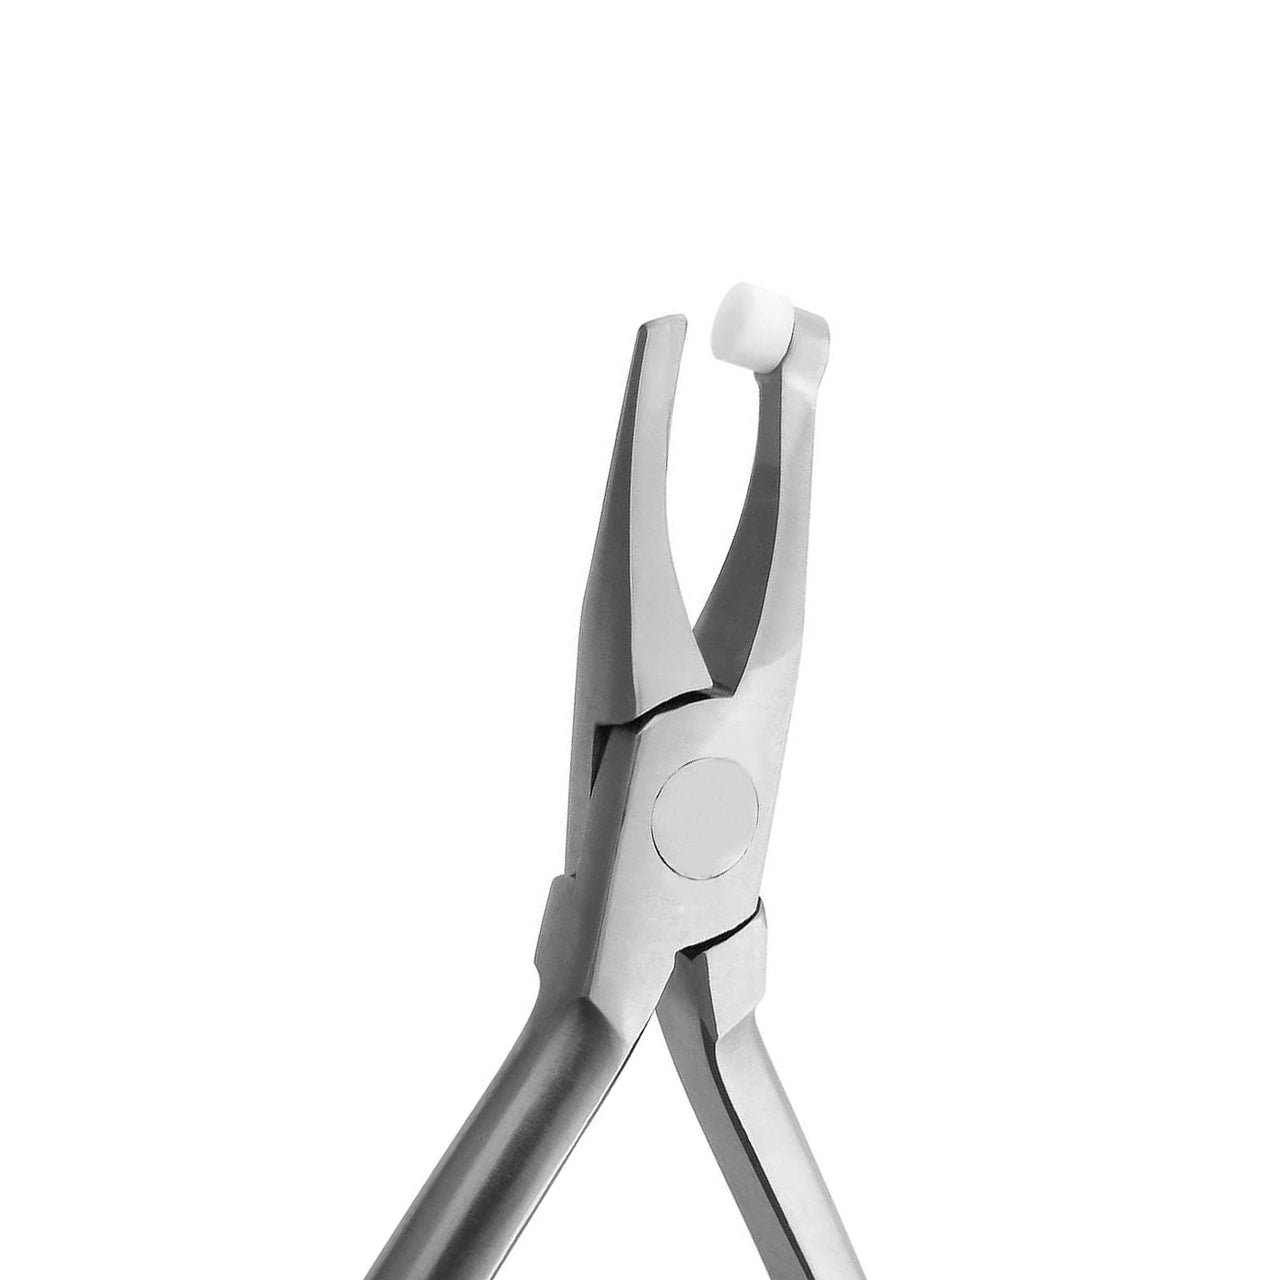 Posterior Band Removing Pliers, Short